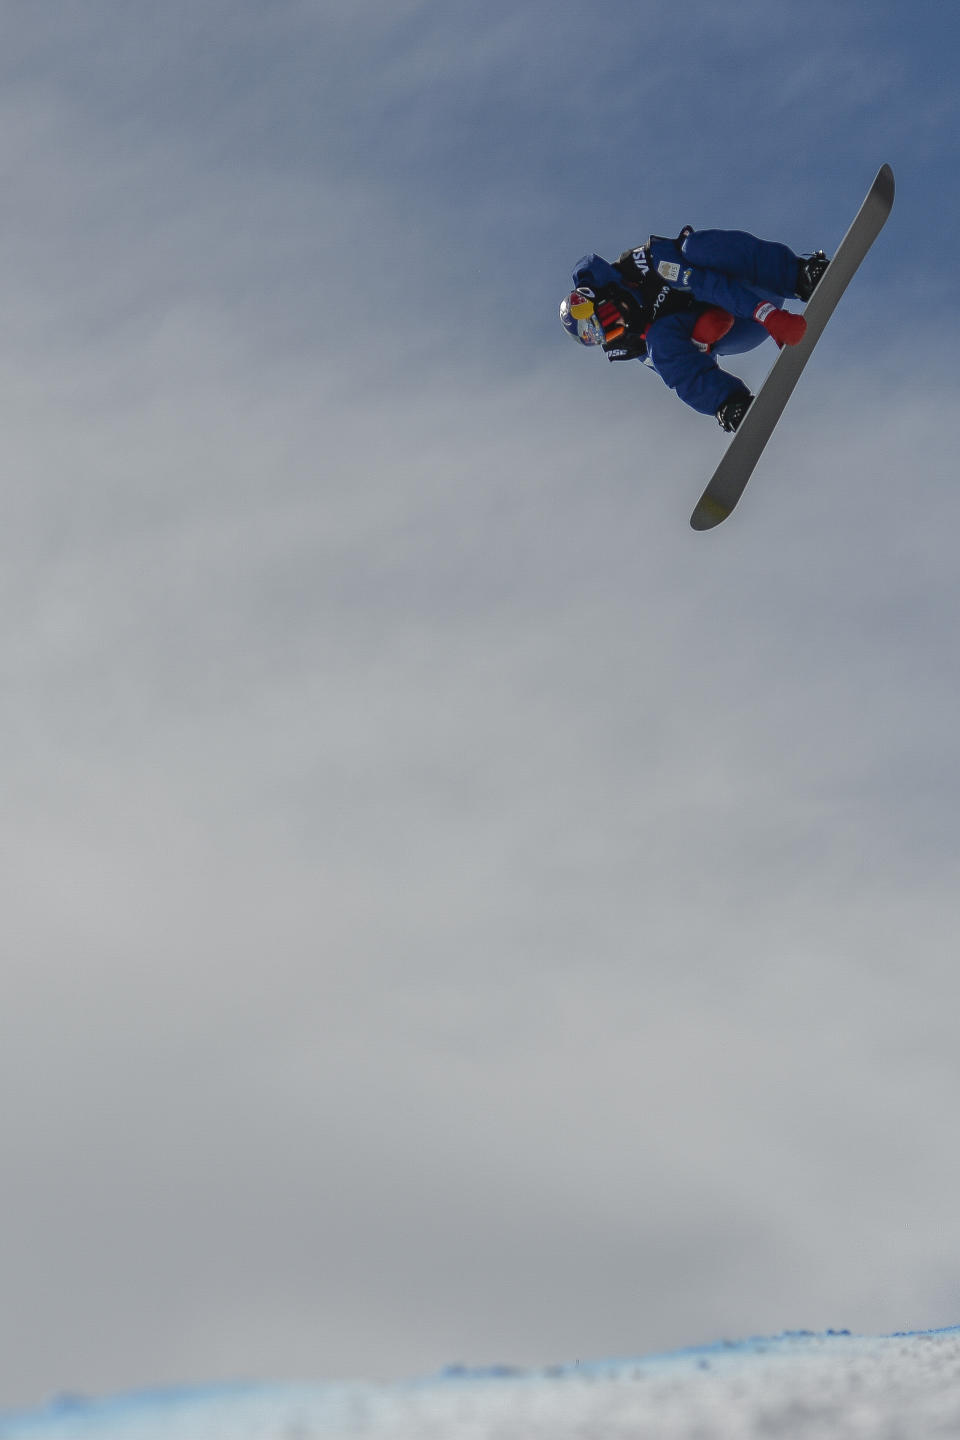 Scotty James, of Australia, competes during the men's snowboard halfpipe final at the freestyle ski and snowboard world championships, Friday, Feb. 8, 2019, in Park City, Utah. (AP Photo/Alex Goodlett)